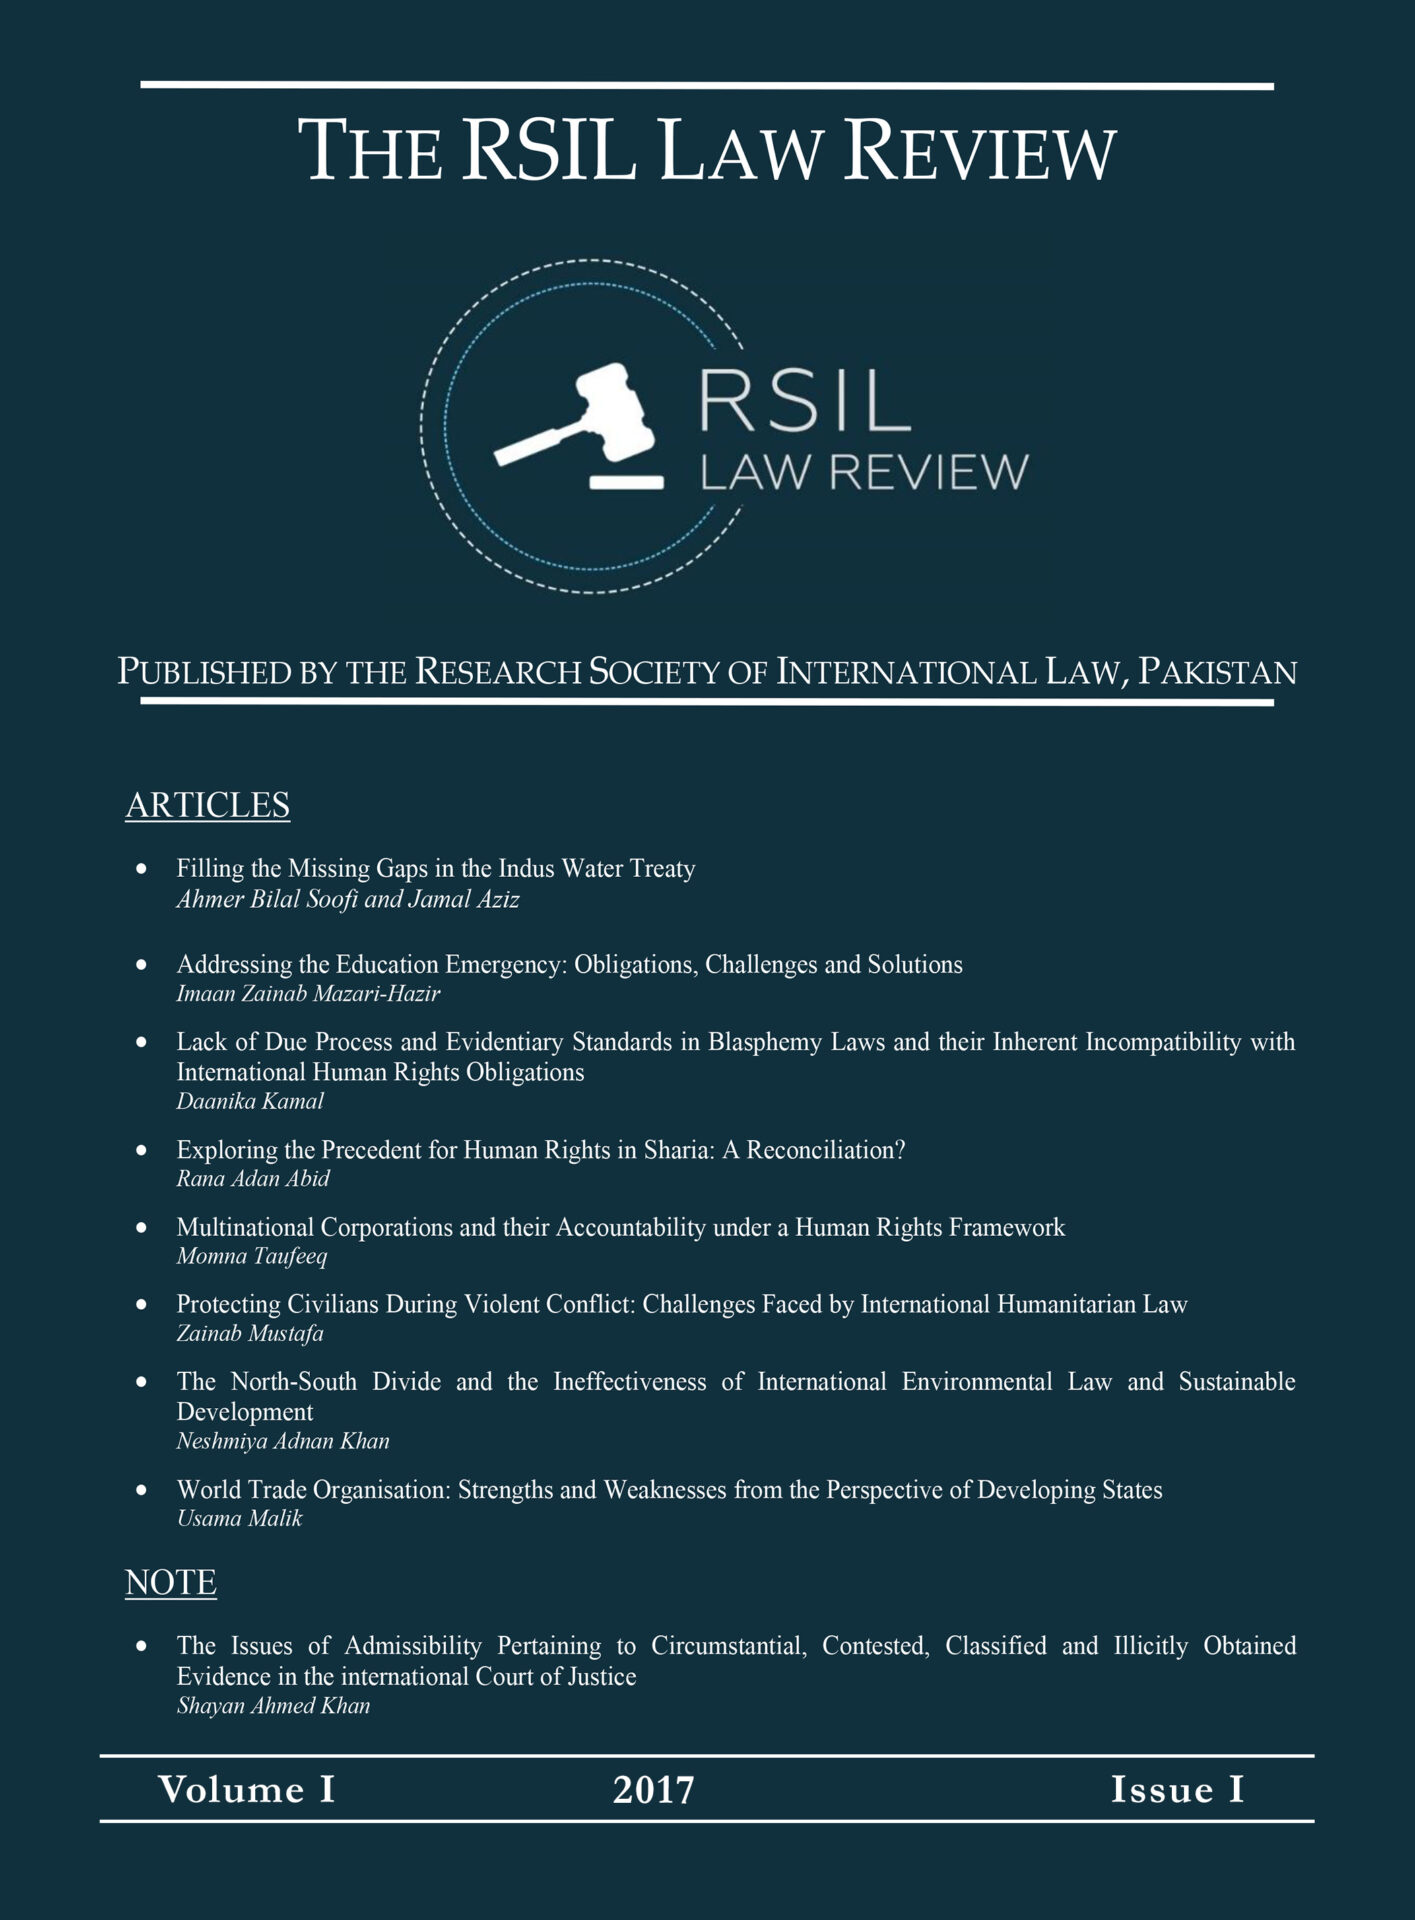 RSIL Law Review Vol. 1 2017